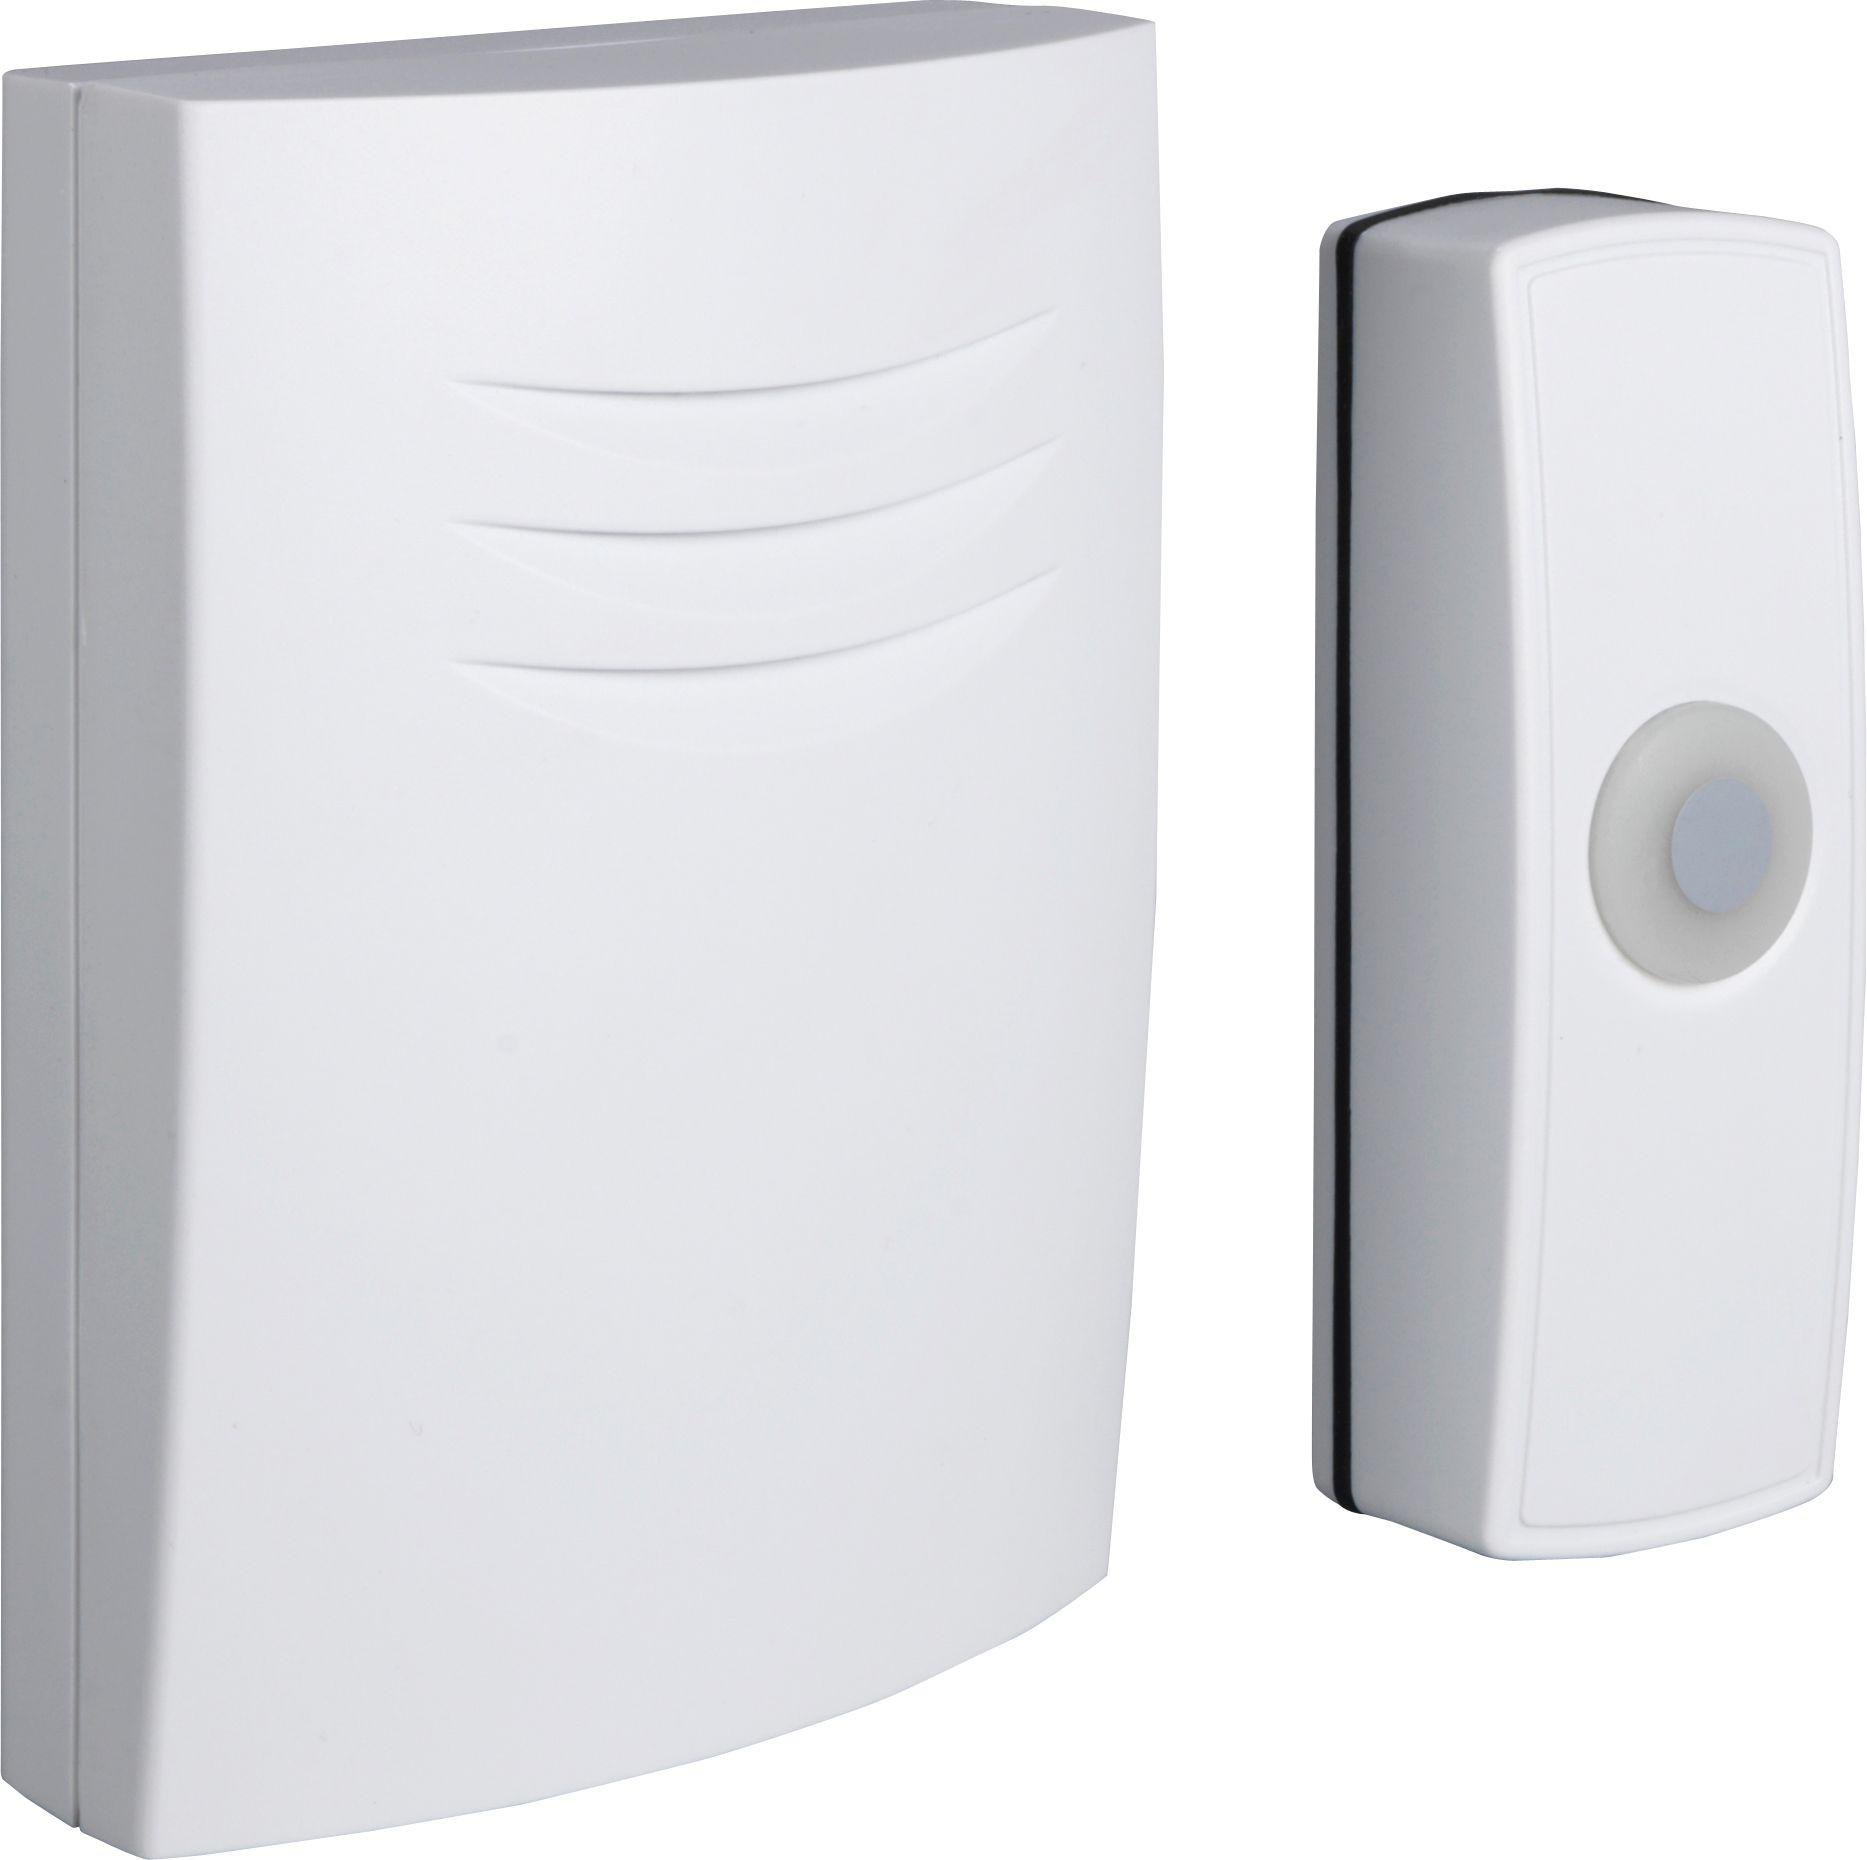 Byron White 60m Portable Wireless Glow in the Dark Doorbell Review